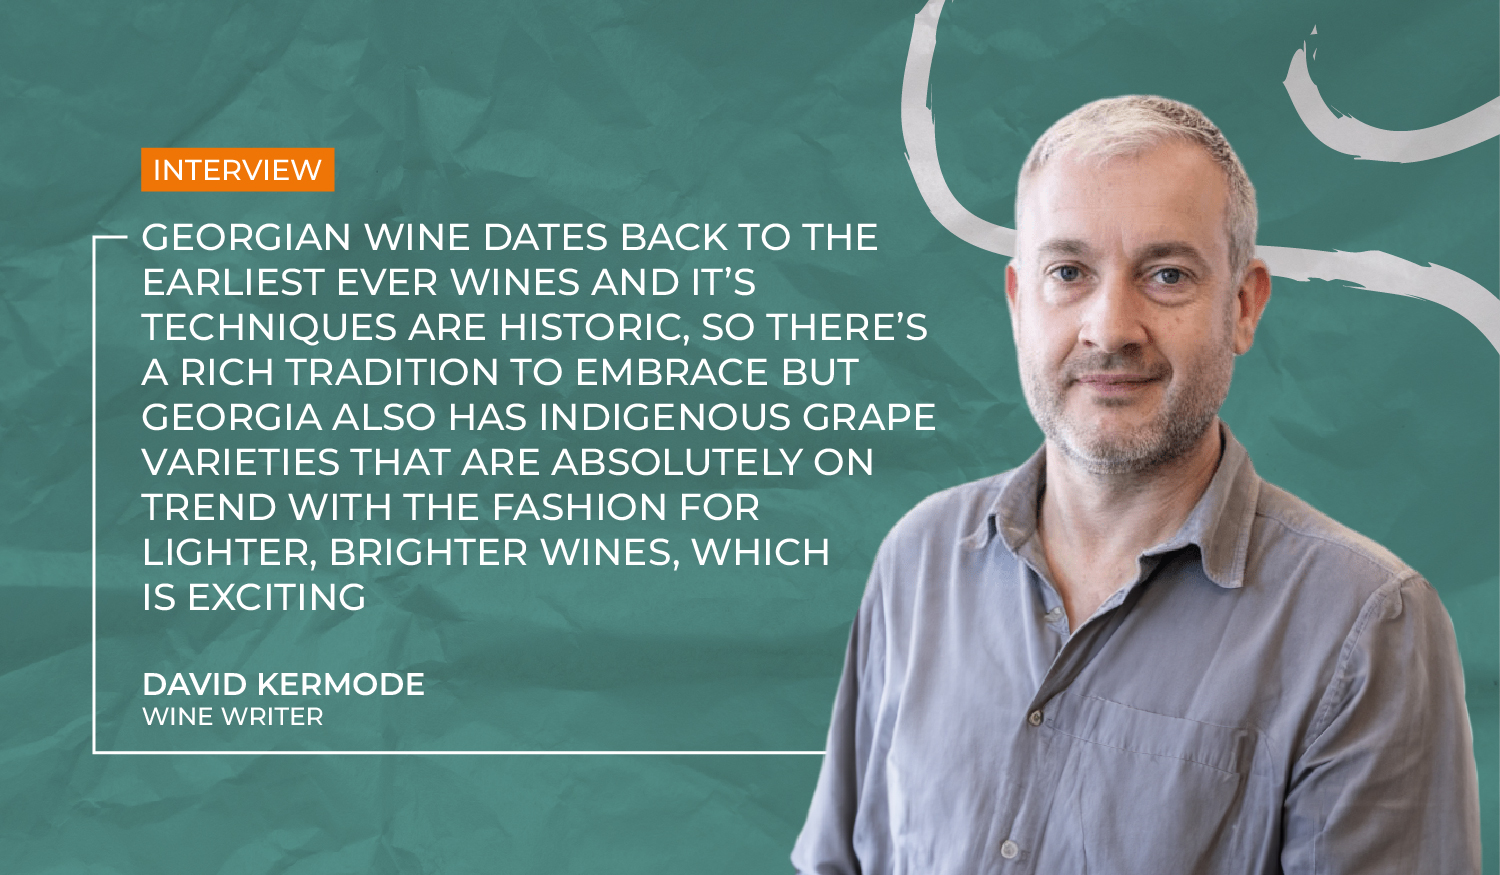 Georgia wine dates back to the earliest ever wines and it’s techniques are historic, so there’s a rich tradition to embrace but Georgia also has indigenous grape varieties that are absolutely on trend with the fashion for lighter, brighter wines, which is exciting, – David Kermode.